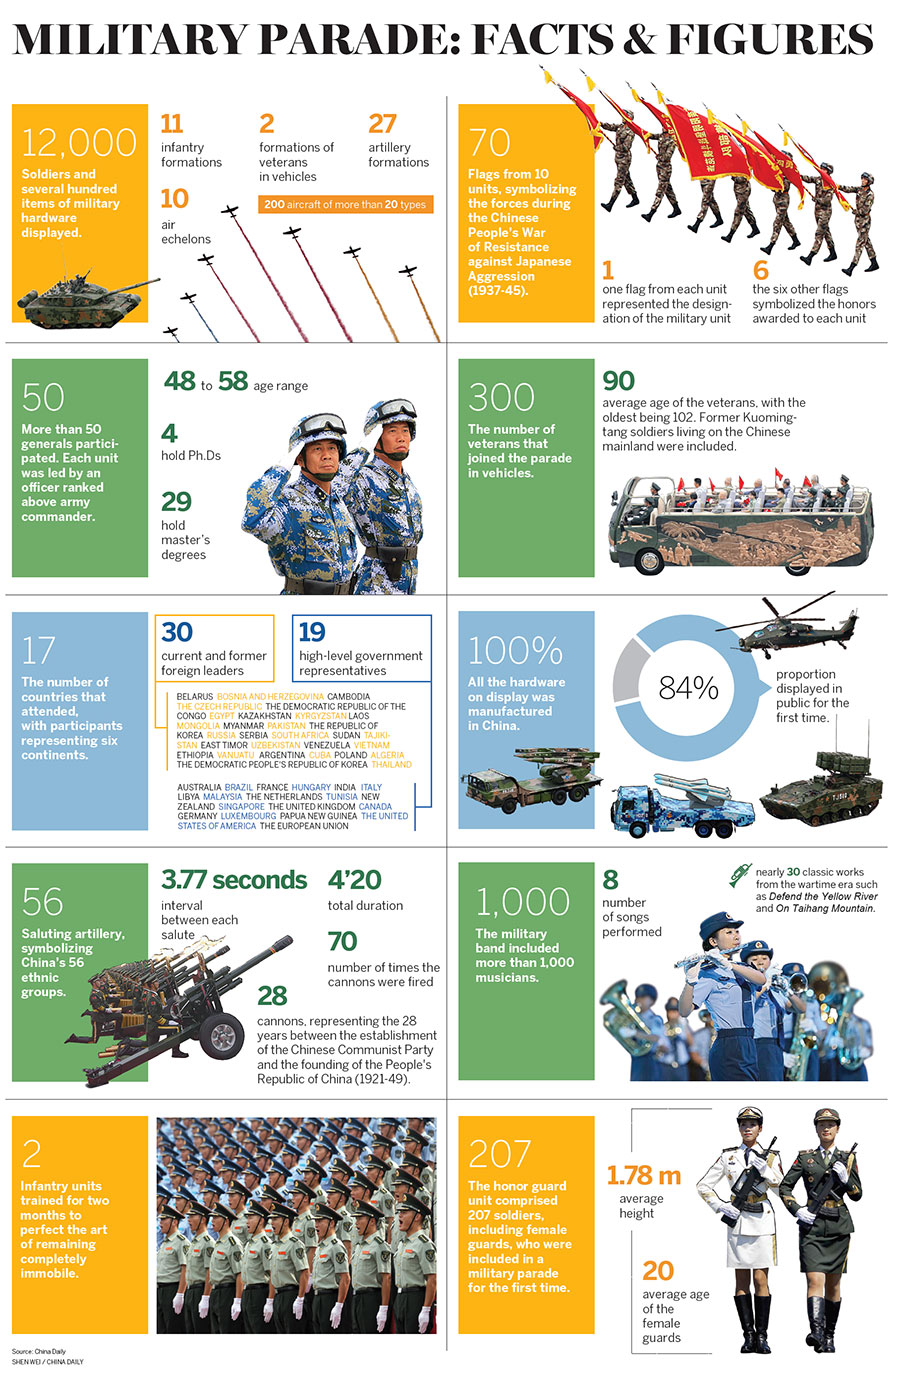 Military parade: Facts & figures